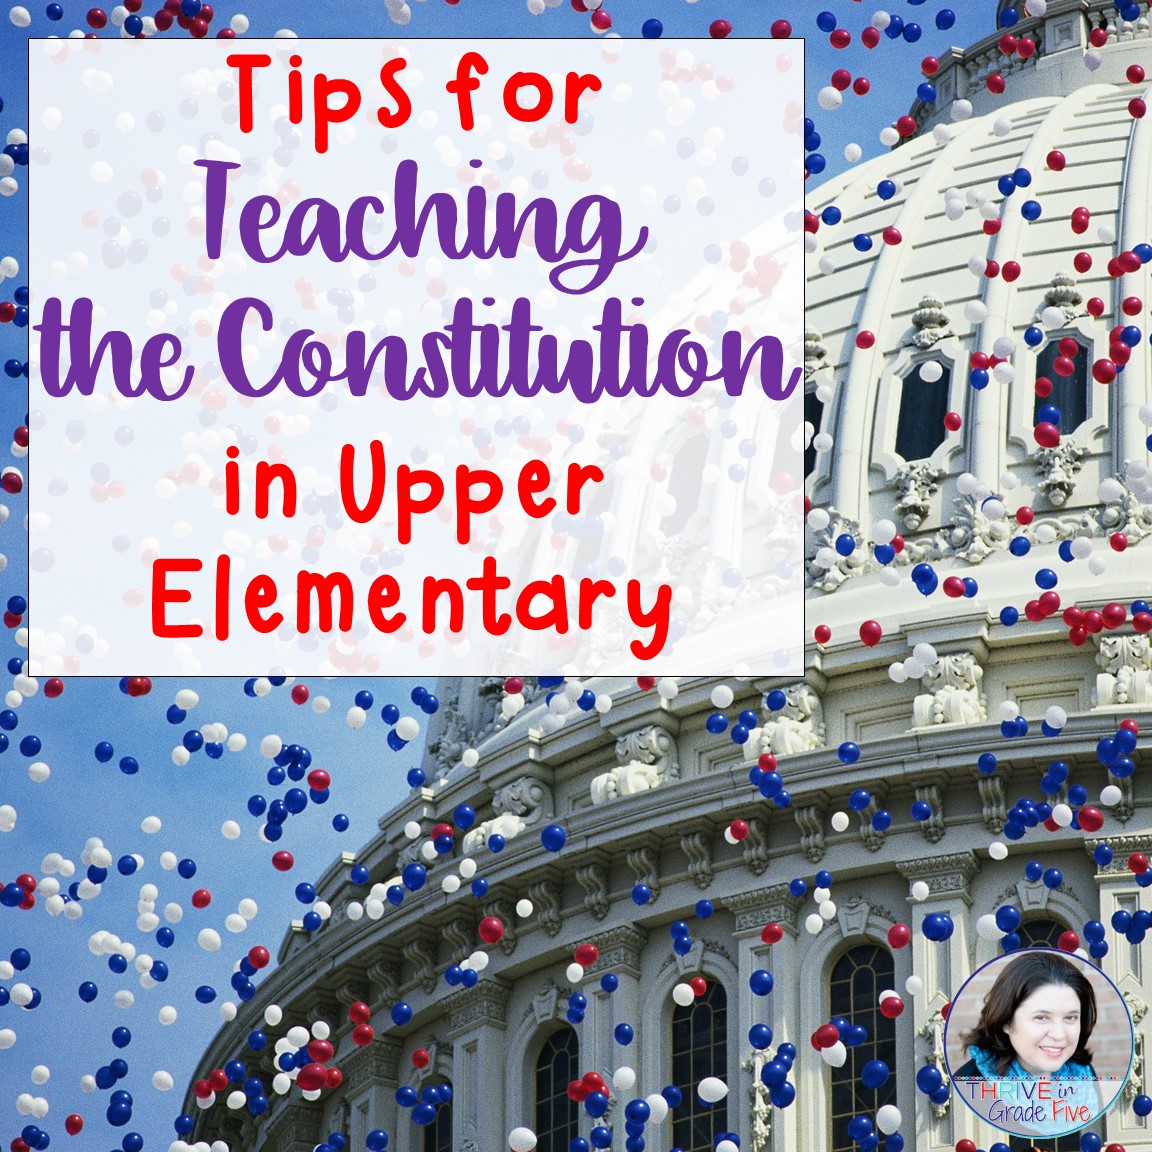 Tips for Teaching the Constitution in Upper Elementary1152 x 1152